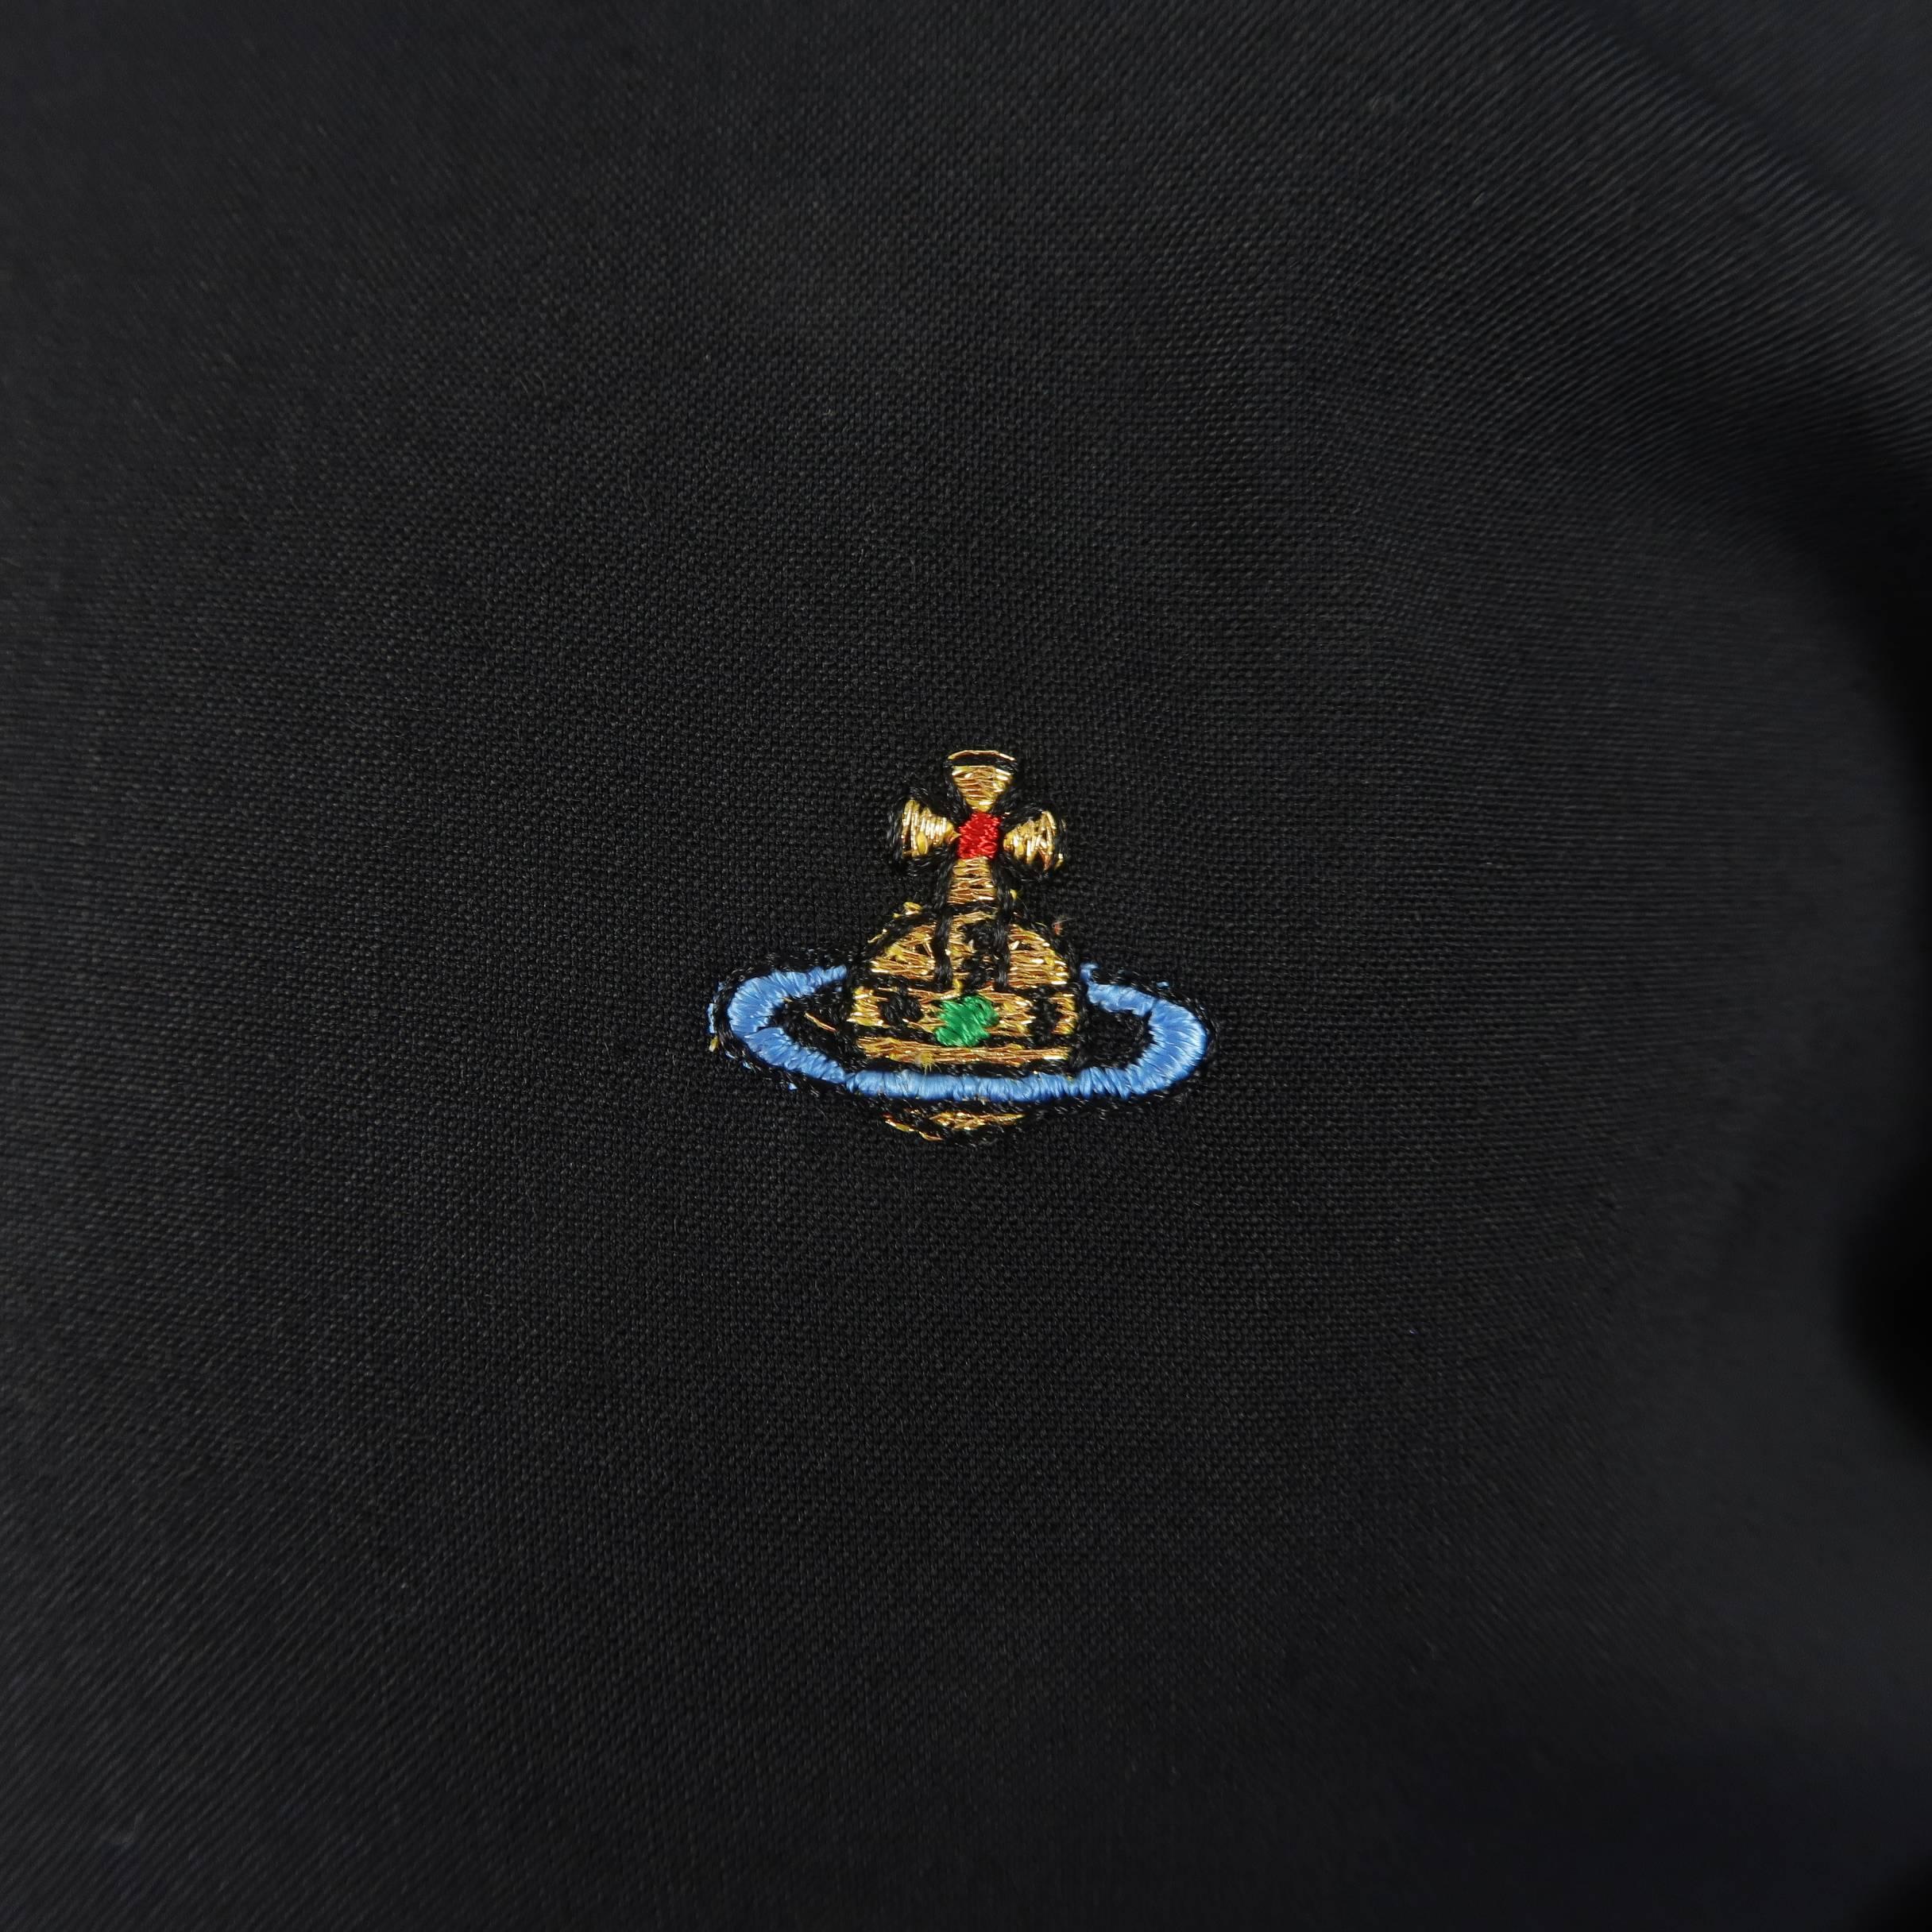 VIVIENNE WESTWOOD MAN shirt comes in black stretch wool gaberdine with an oversized, two button, pointed high collar, tan buttons, drop shoulder, curved sleeves, and mini orb embroidery on chest. Made in Italy.
 
Excellent Pre-Owned